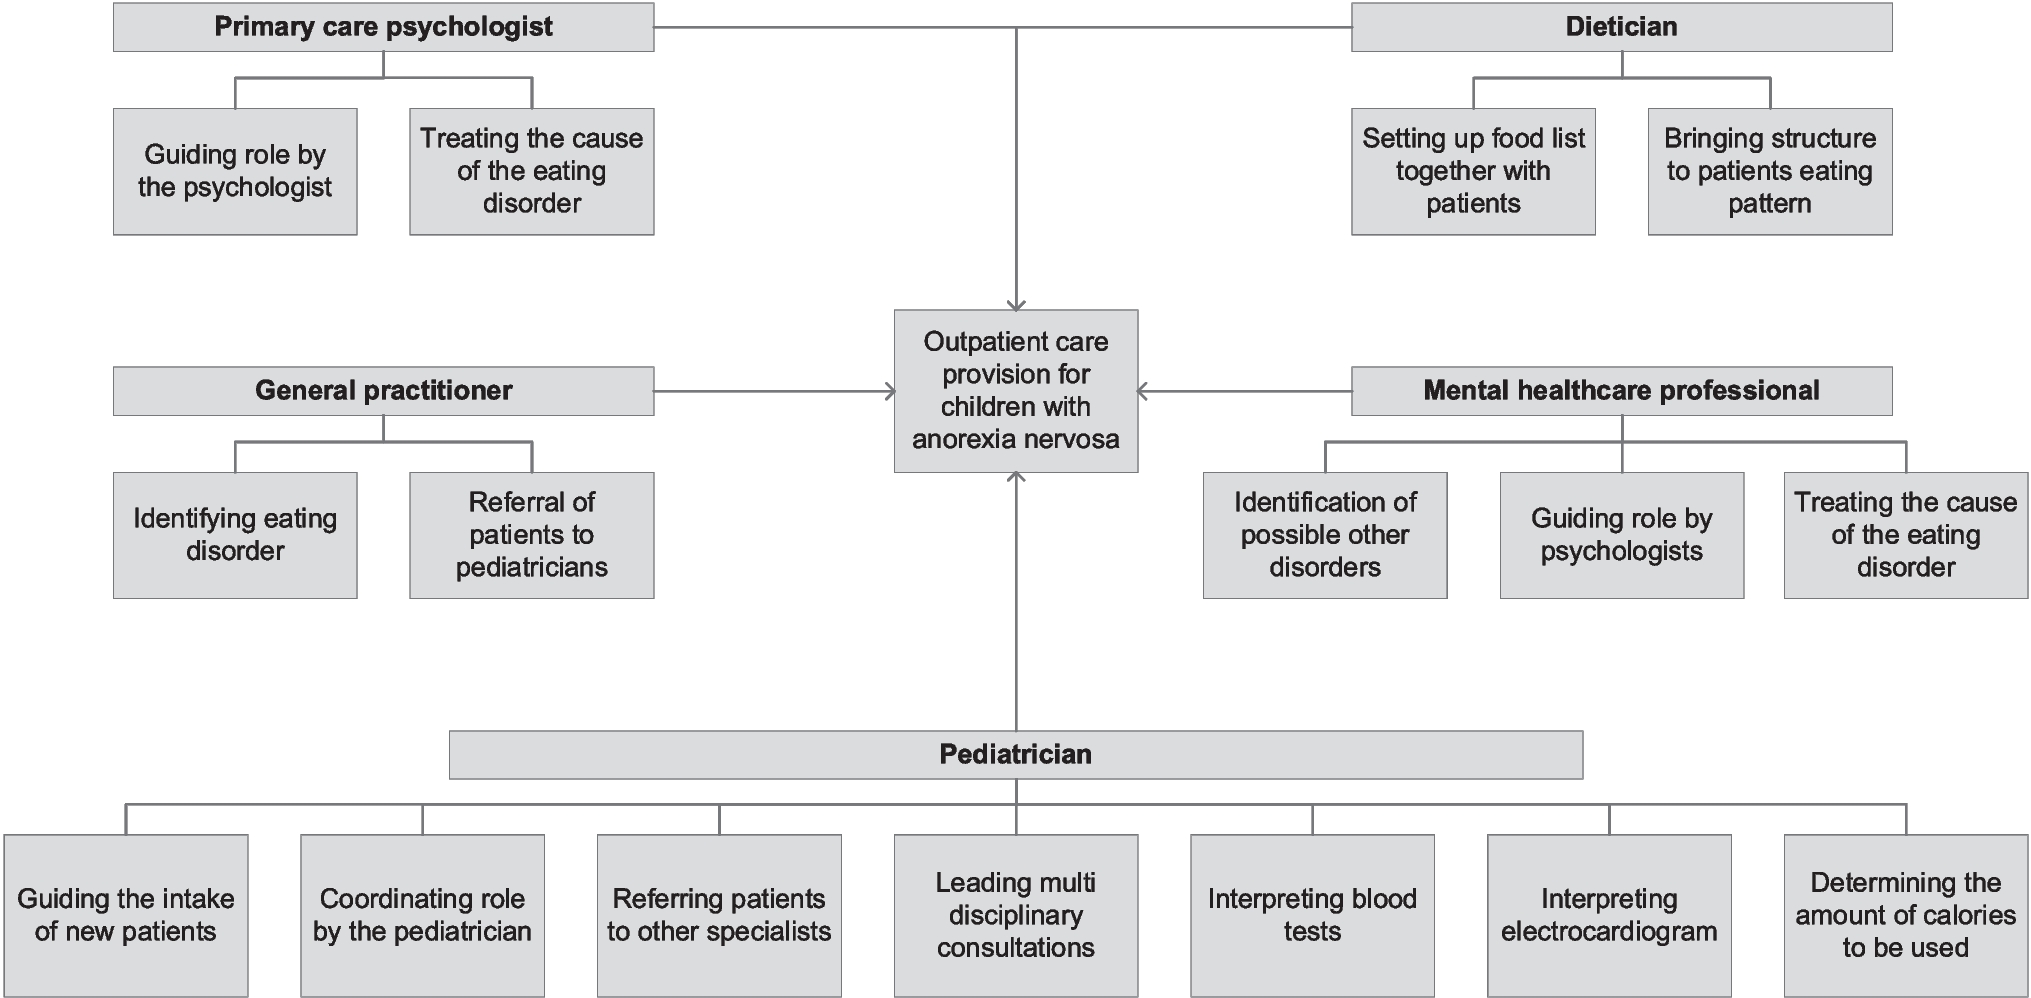 Continuity of care for children with anorexia nervosa in the Netherlands: a modular perspective